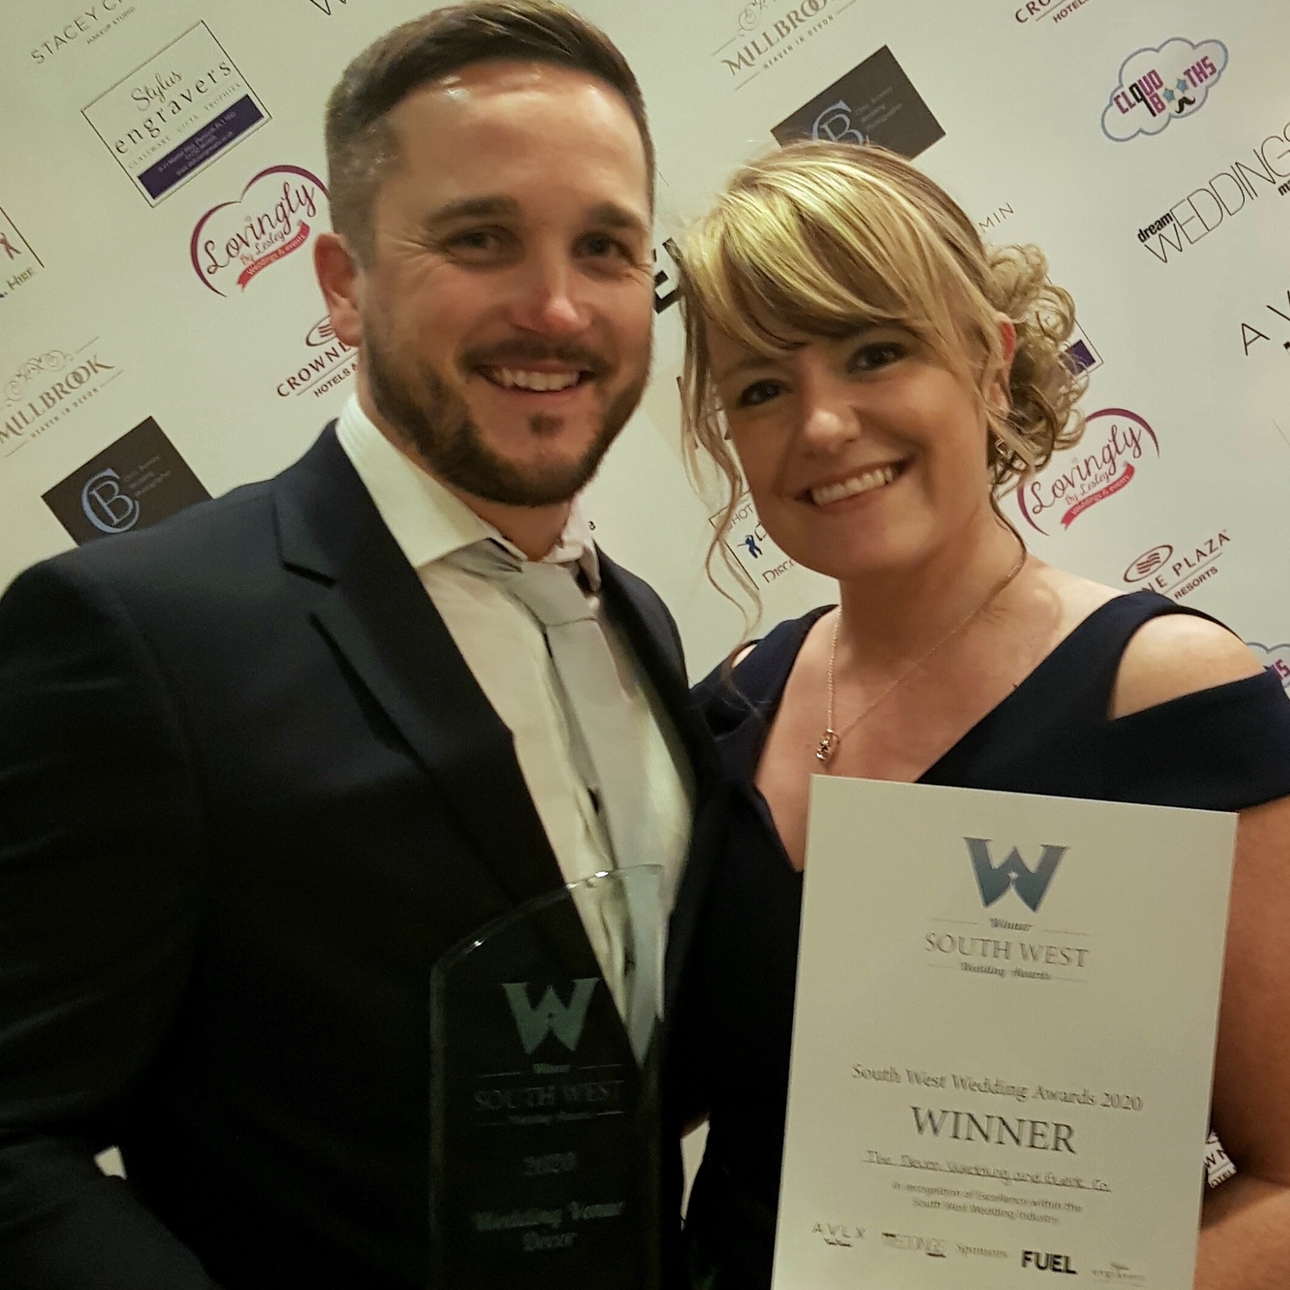 The South West Wedding Awards 2020 has highlighted the best wedding specialists in the area, as voted for by the public: Image 1